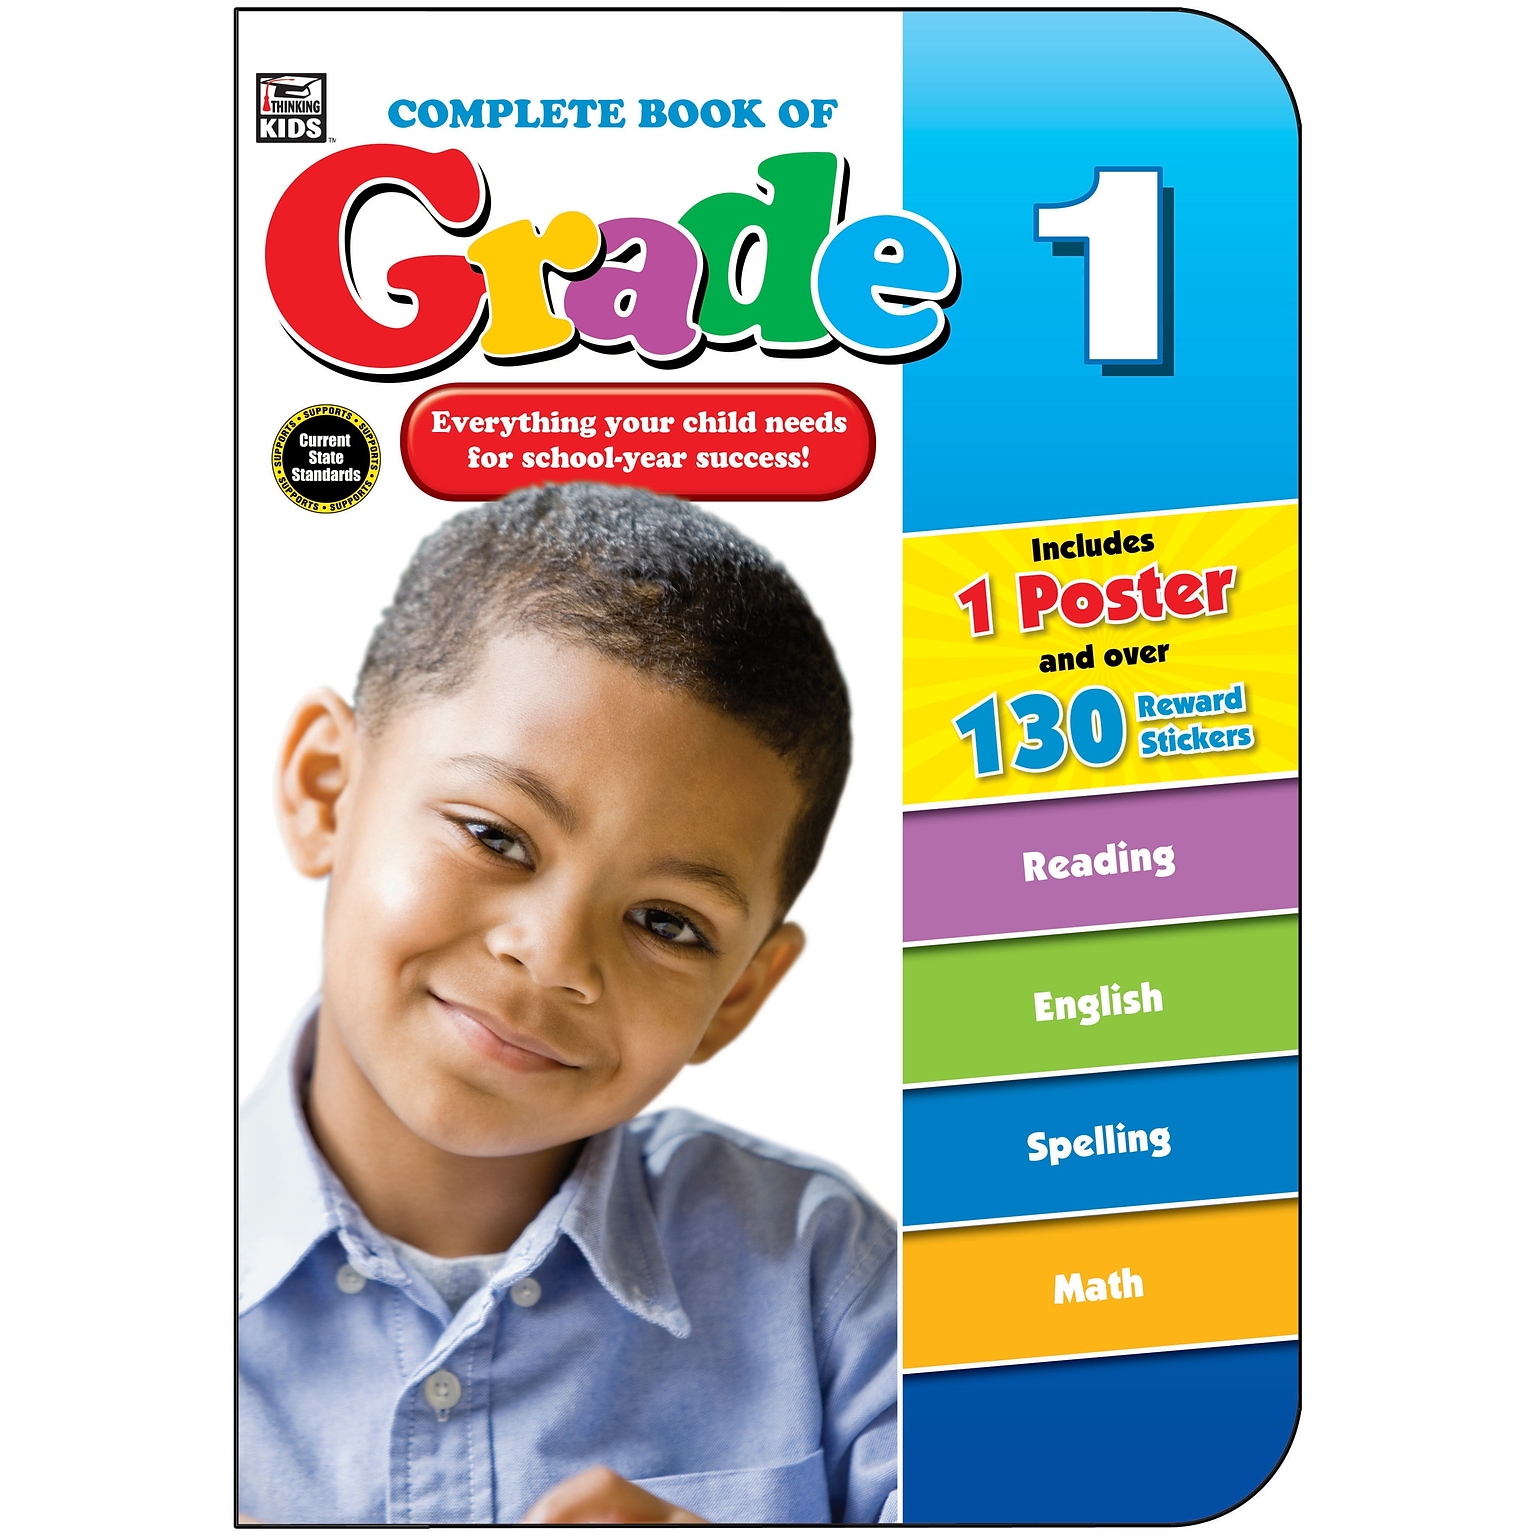 Thinking Kids Complete Book of Grade 1